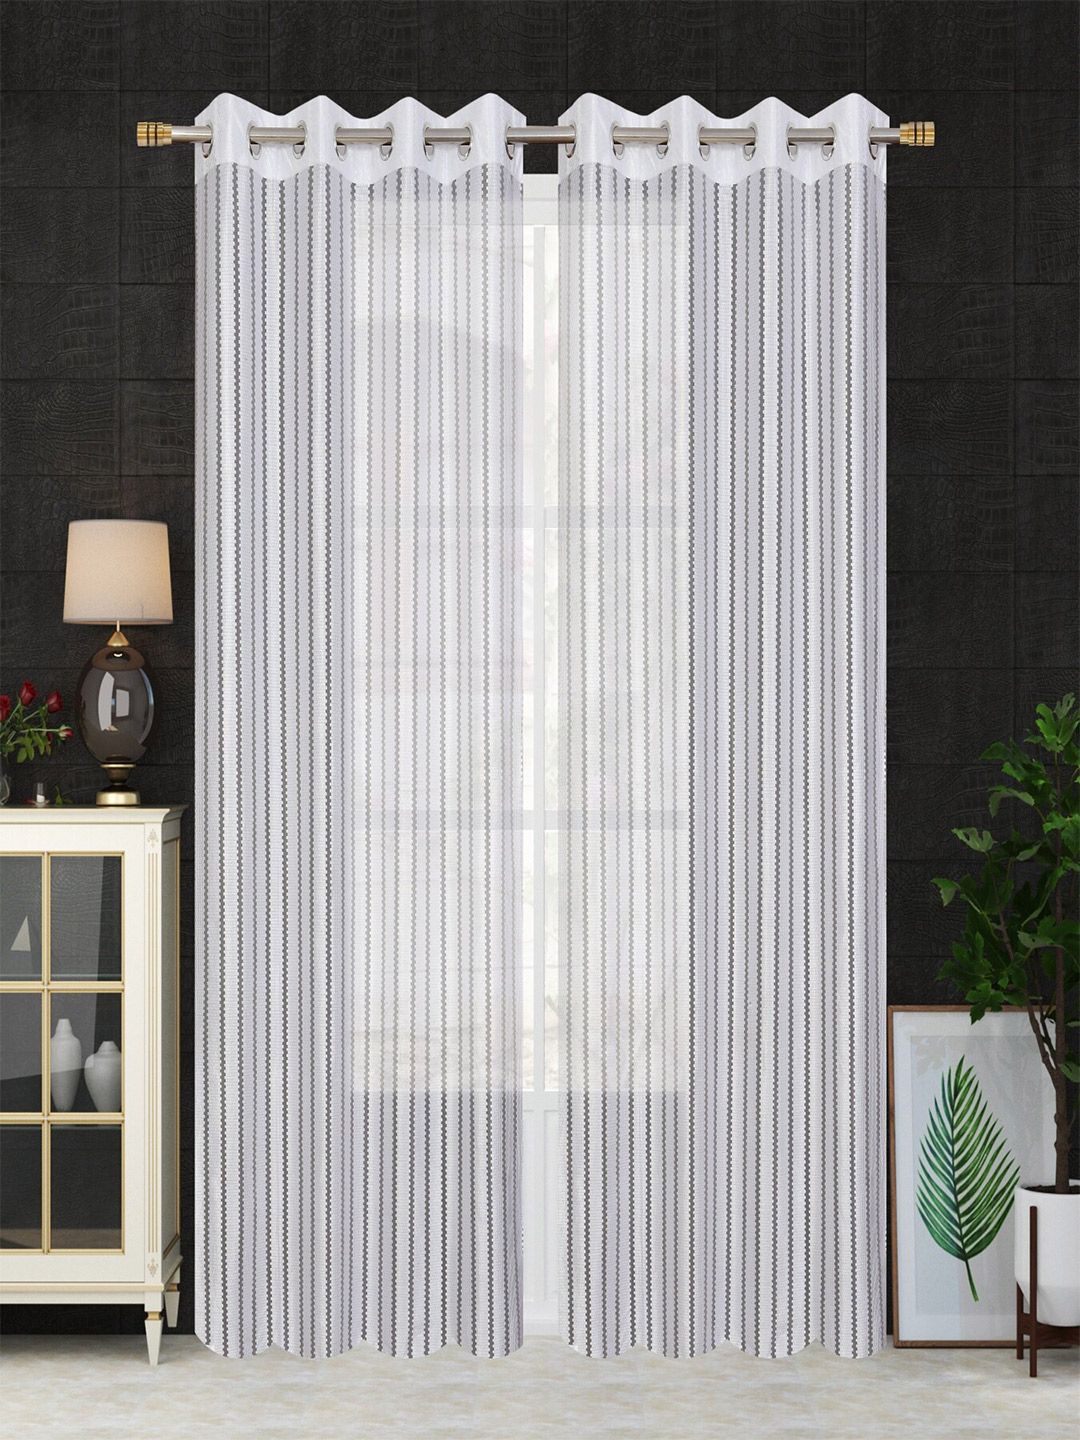 Homefab India White Set of 2 Sheer Eyelet Long Door Curtains Price in India